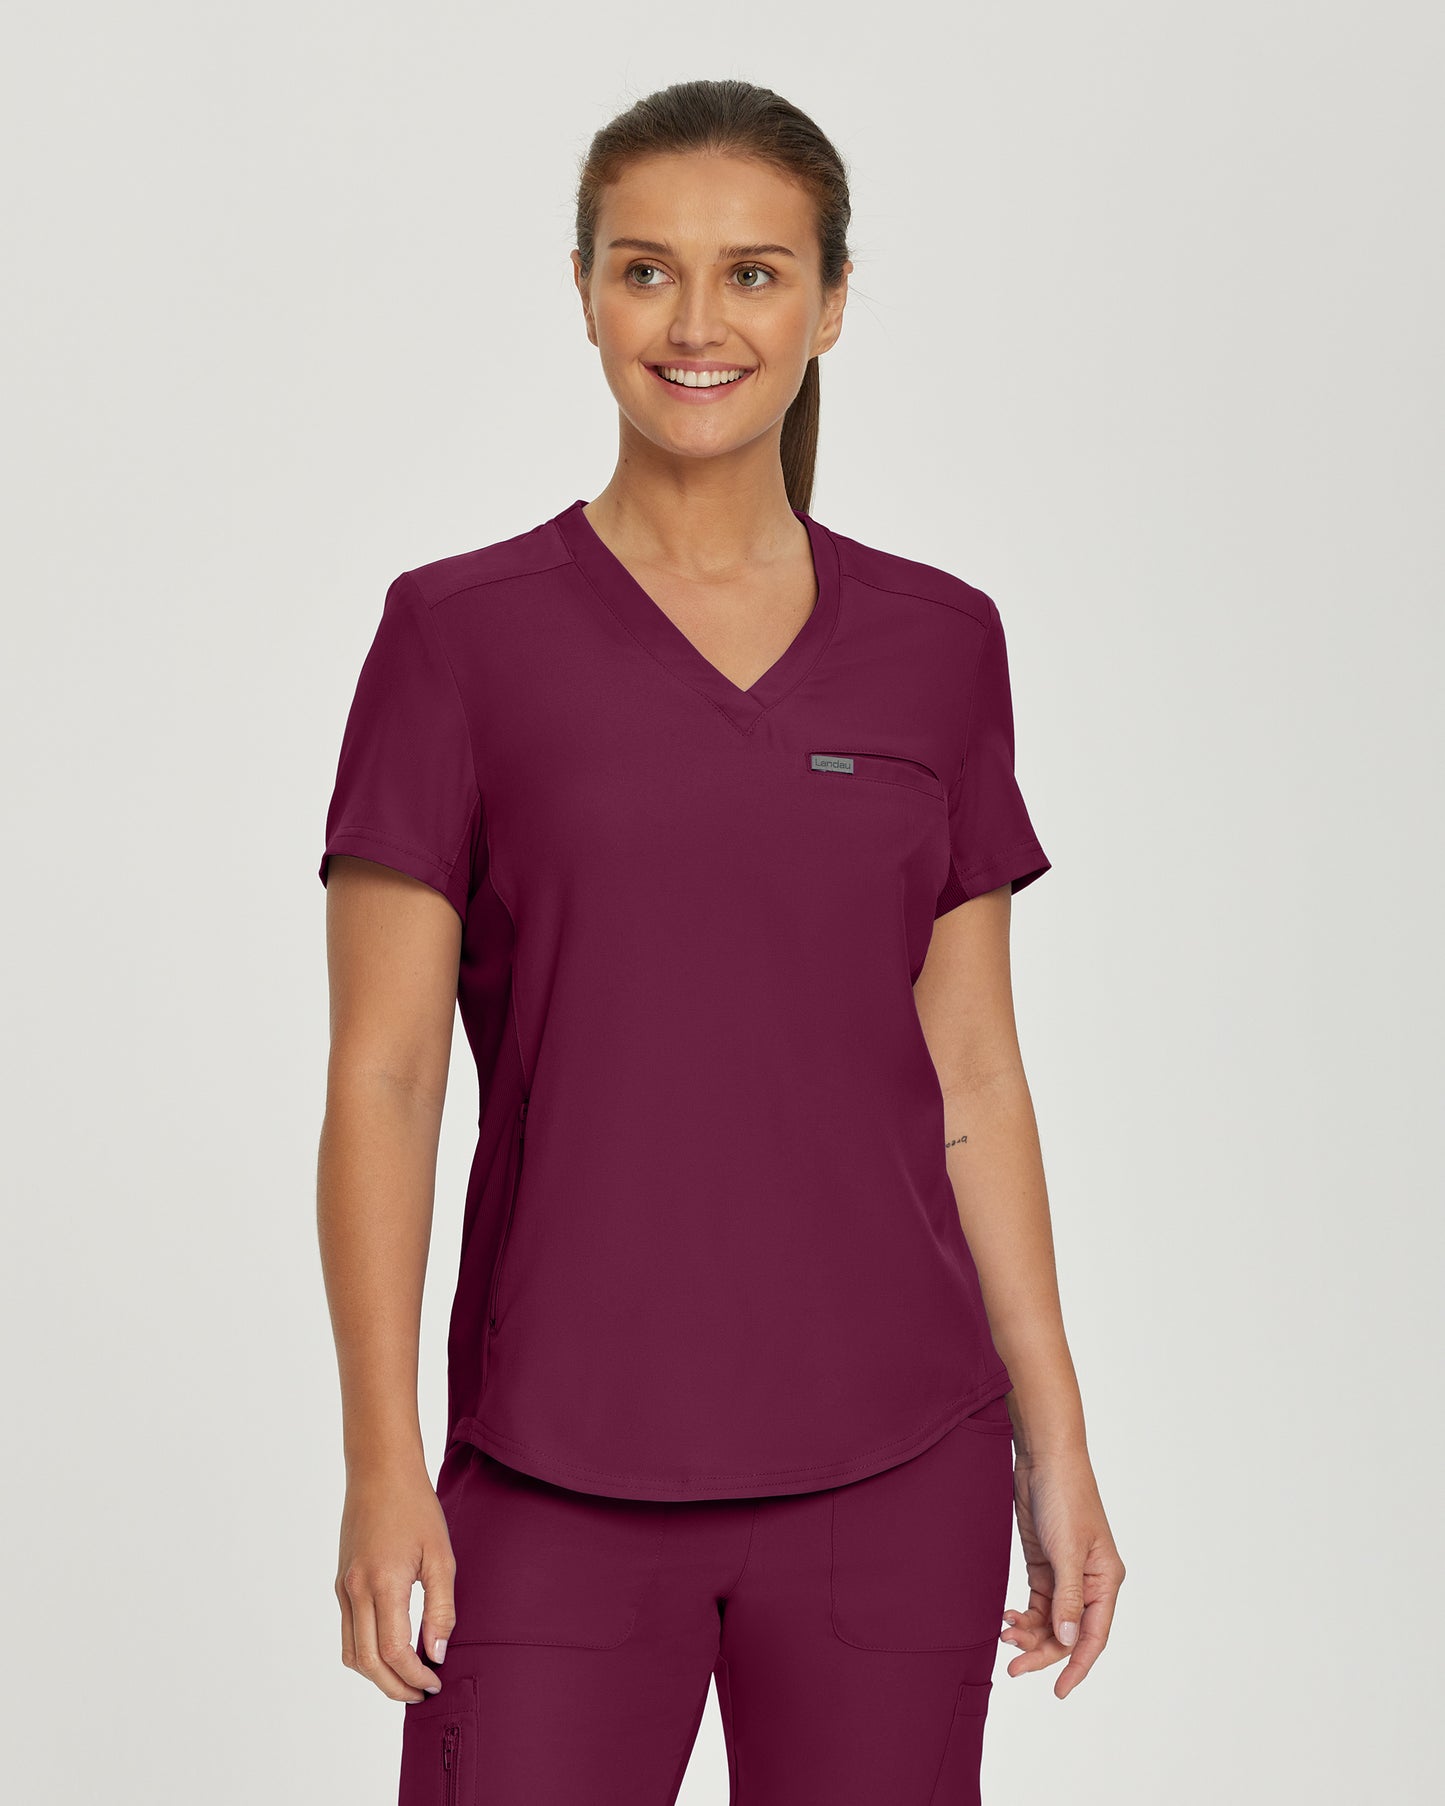 Women's top two pockets  - FORWARD - L101H